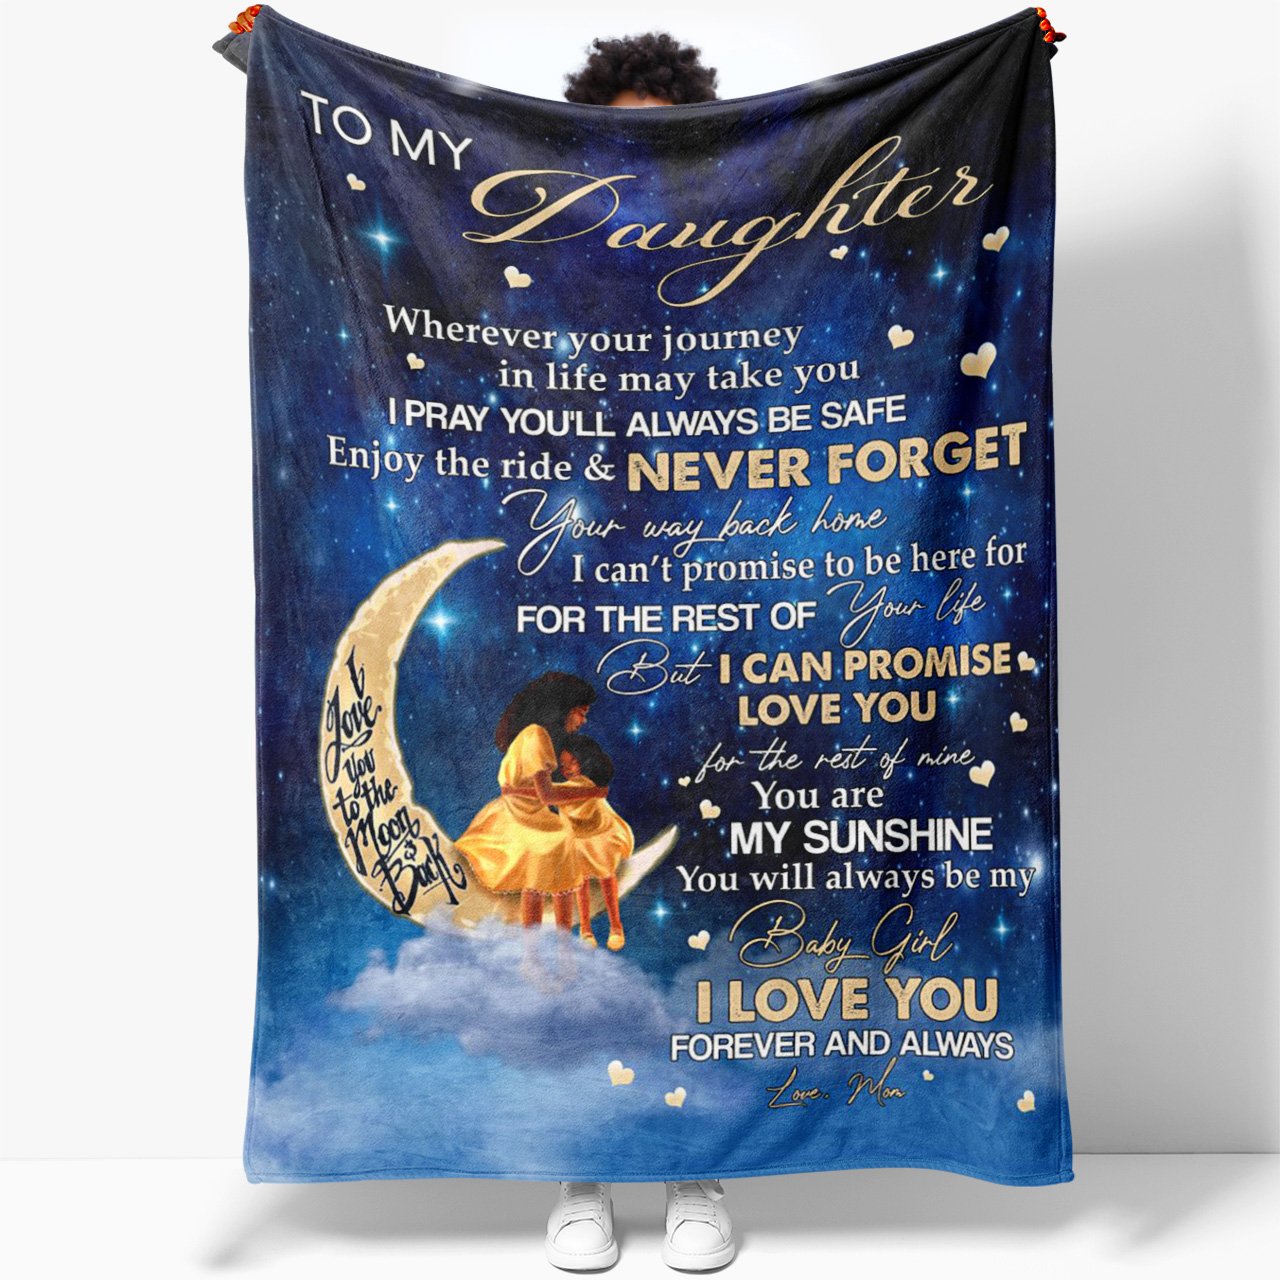 Blanket Gift Ideas for My Black Daughter, I Pray You'll be Safe Enjoy the Ride Blanket for Daughter, Christmas Presents For Grown Up Daughters